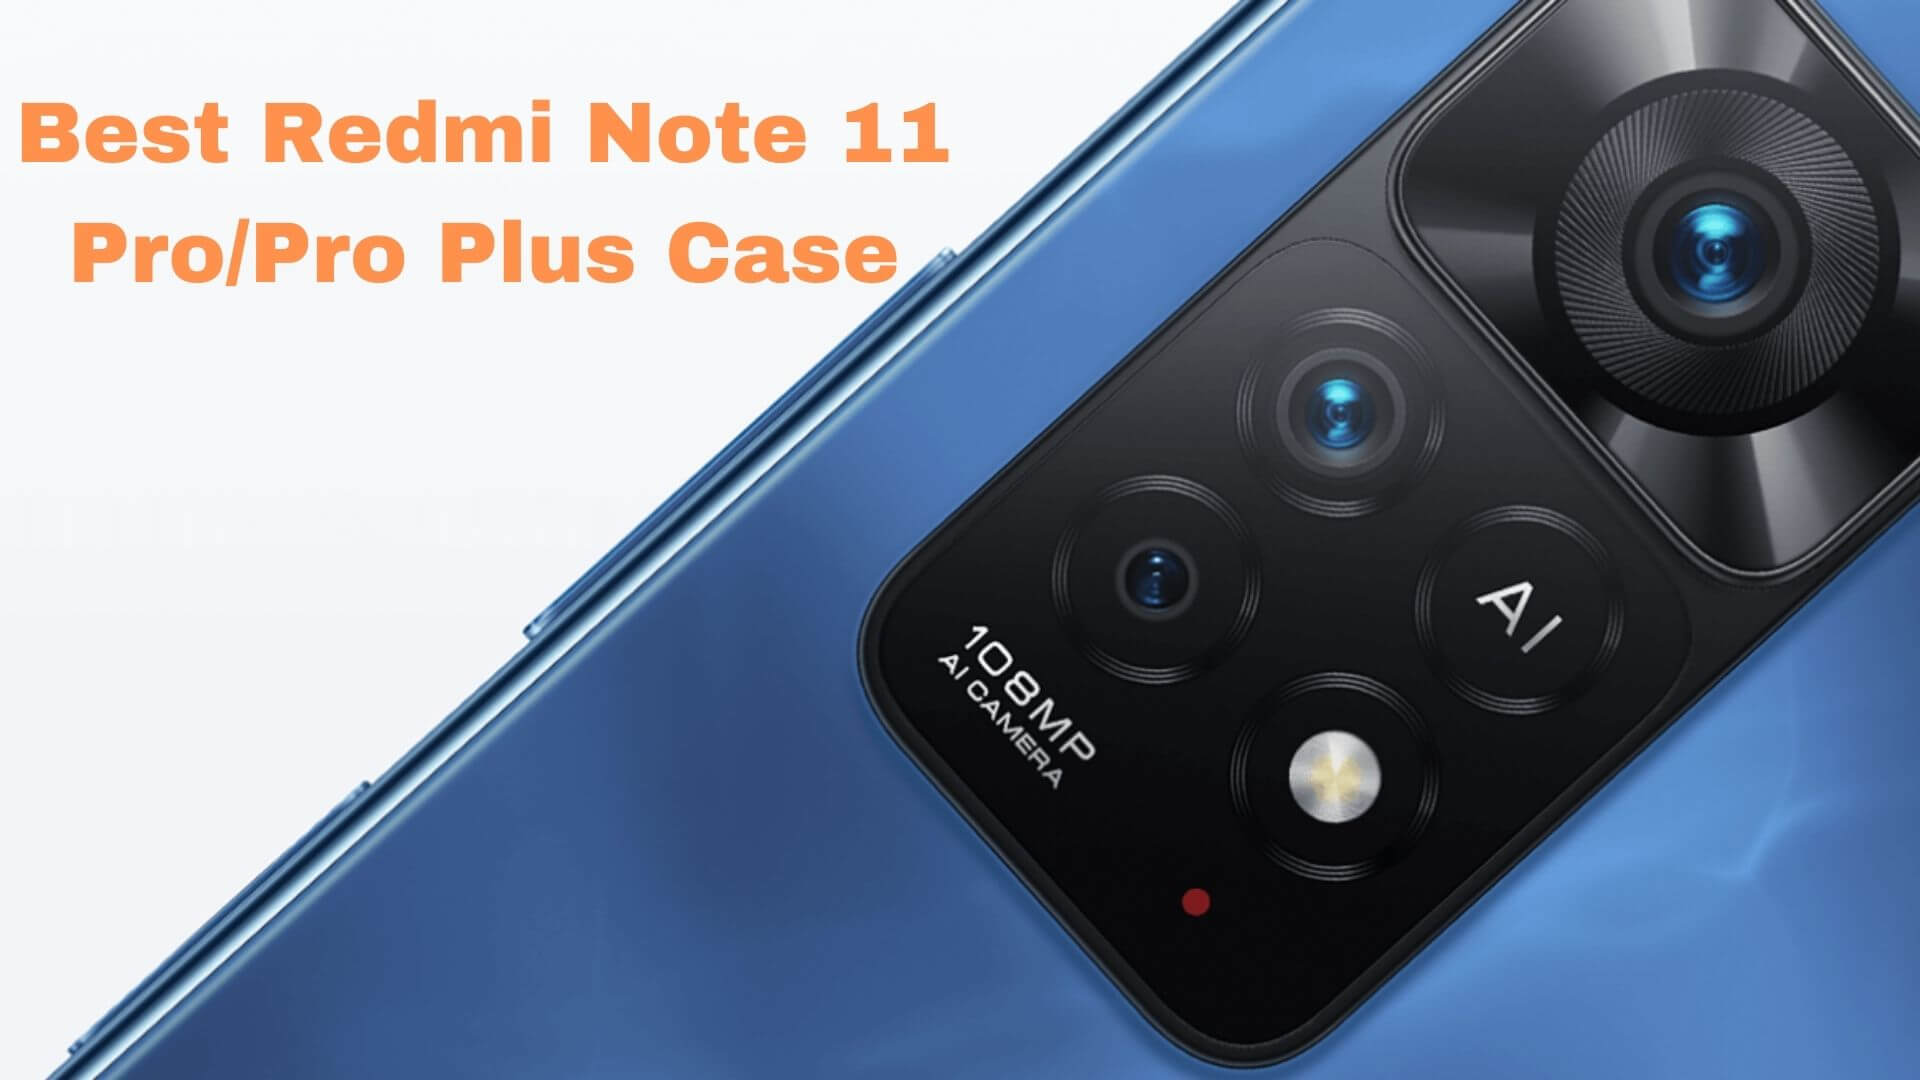 Best Redmi Note 11 Pro/Pro Plus Cases to Buy in India